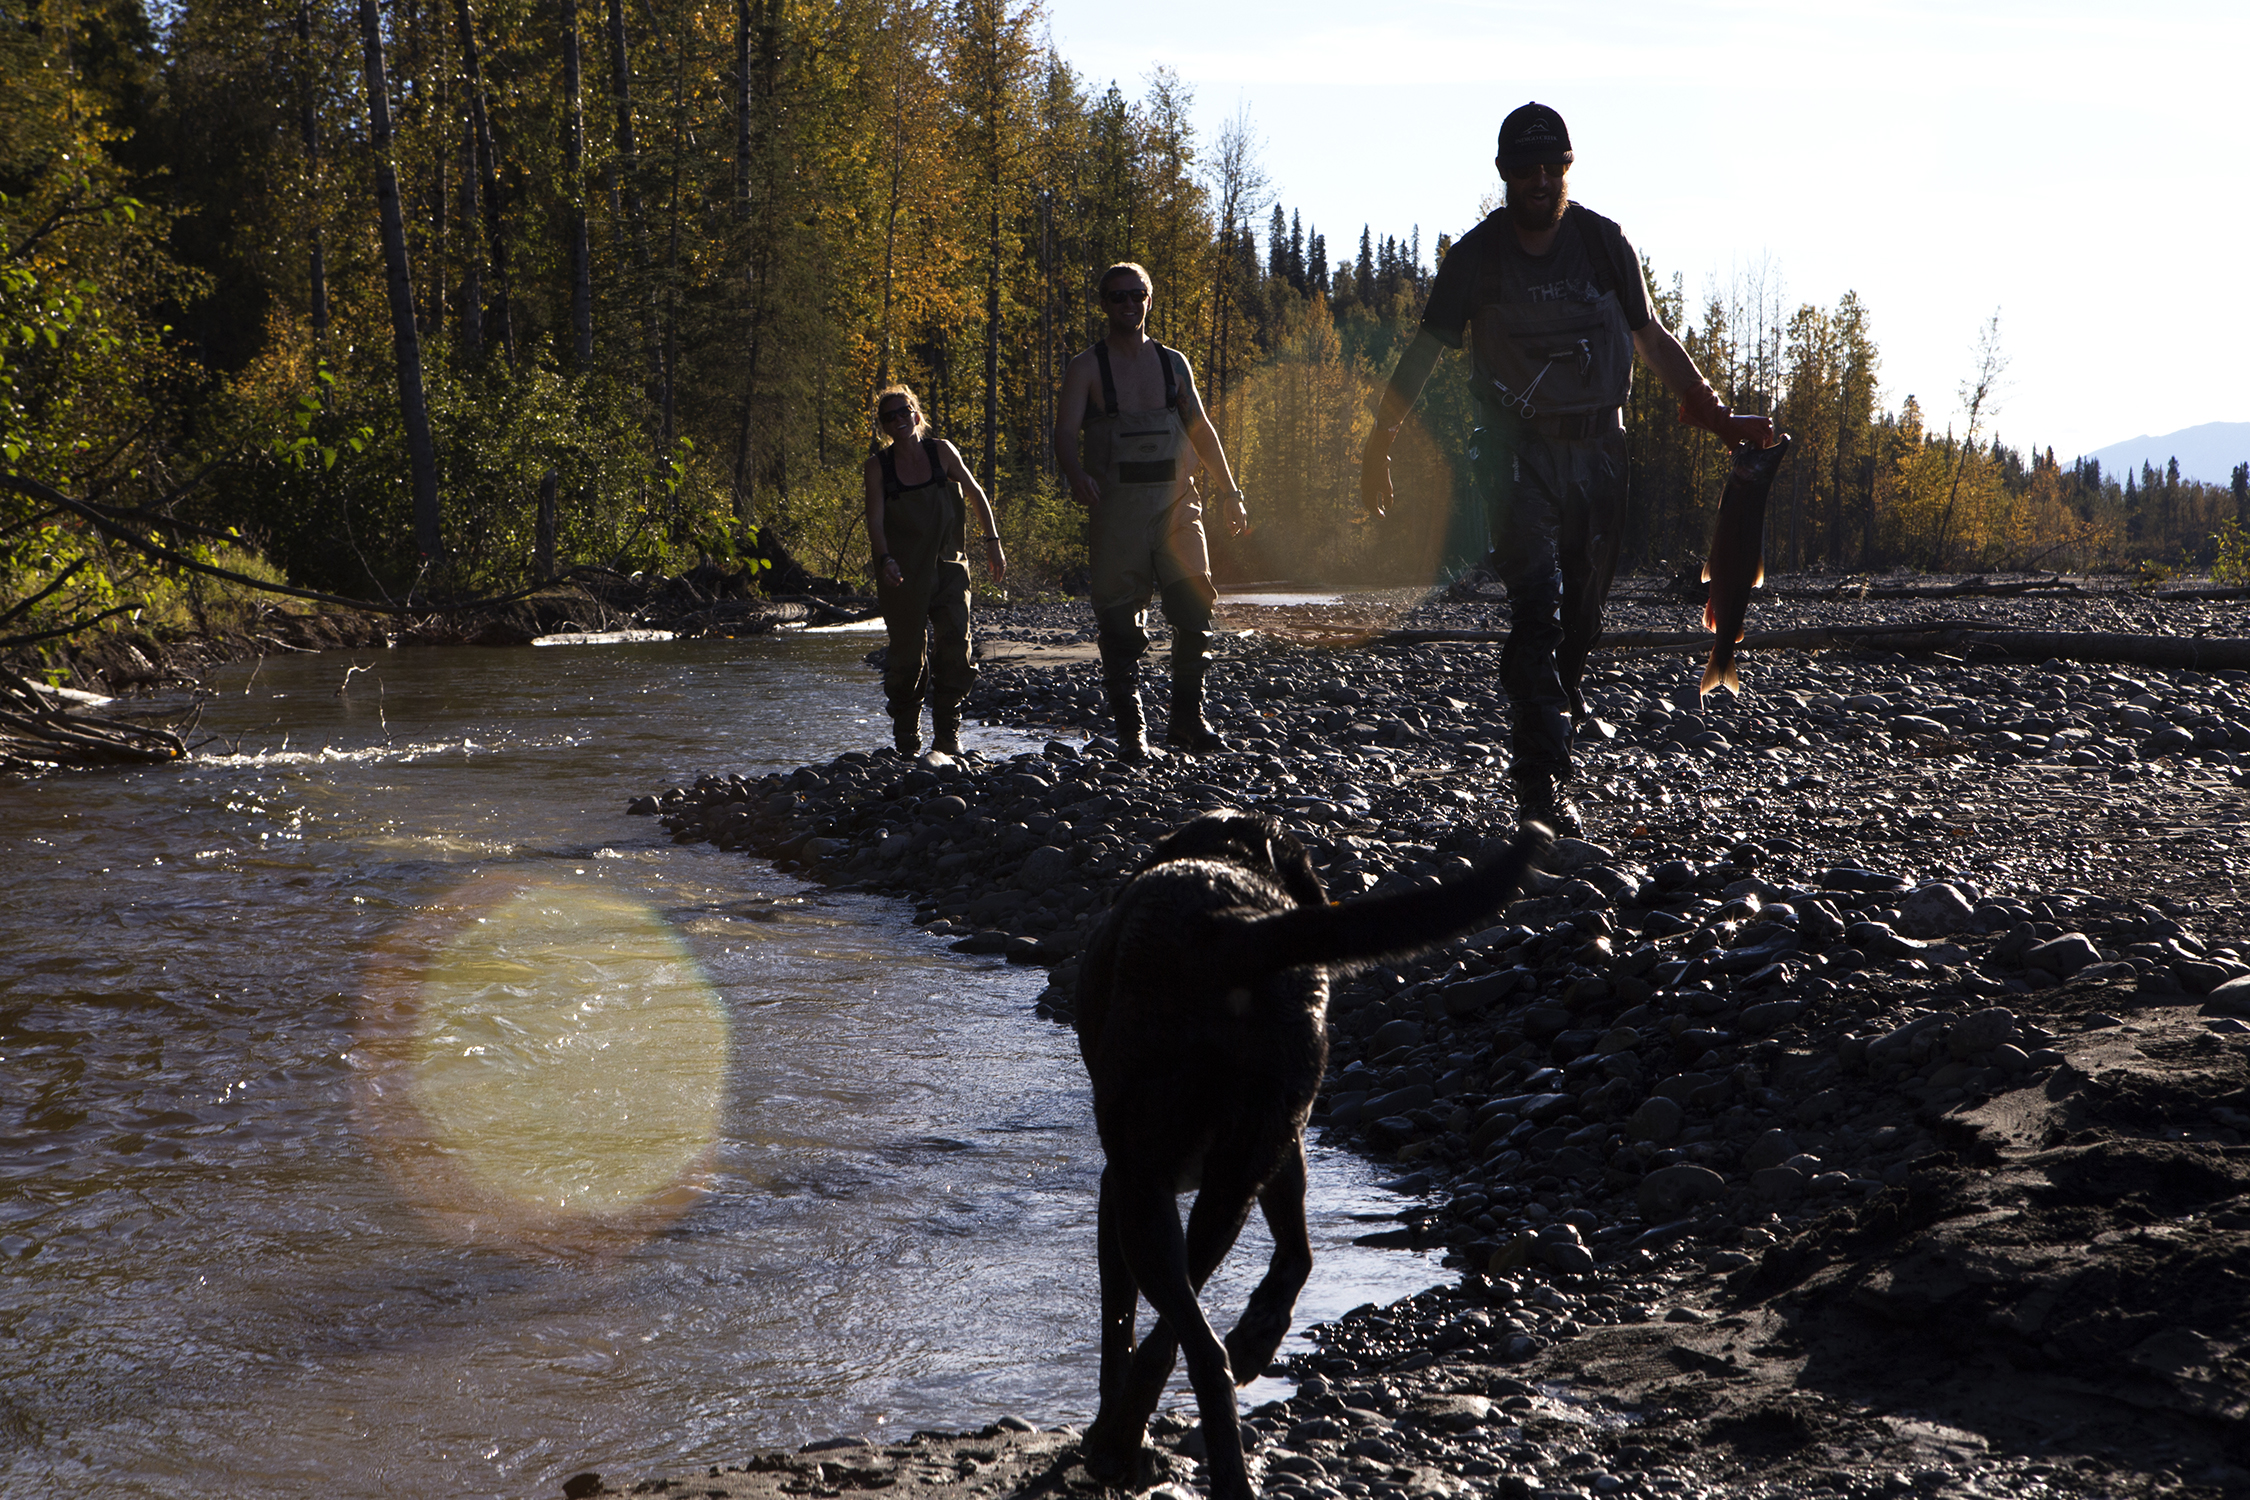  Jensen Heabler, Austin and Whitney Krempin enjoy the autumn afternoon hiking and catching Silvers and Reds along a stream outside Talkeenta, Alaska. © Photo by Gail Fisher 